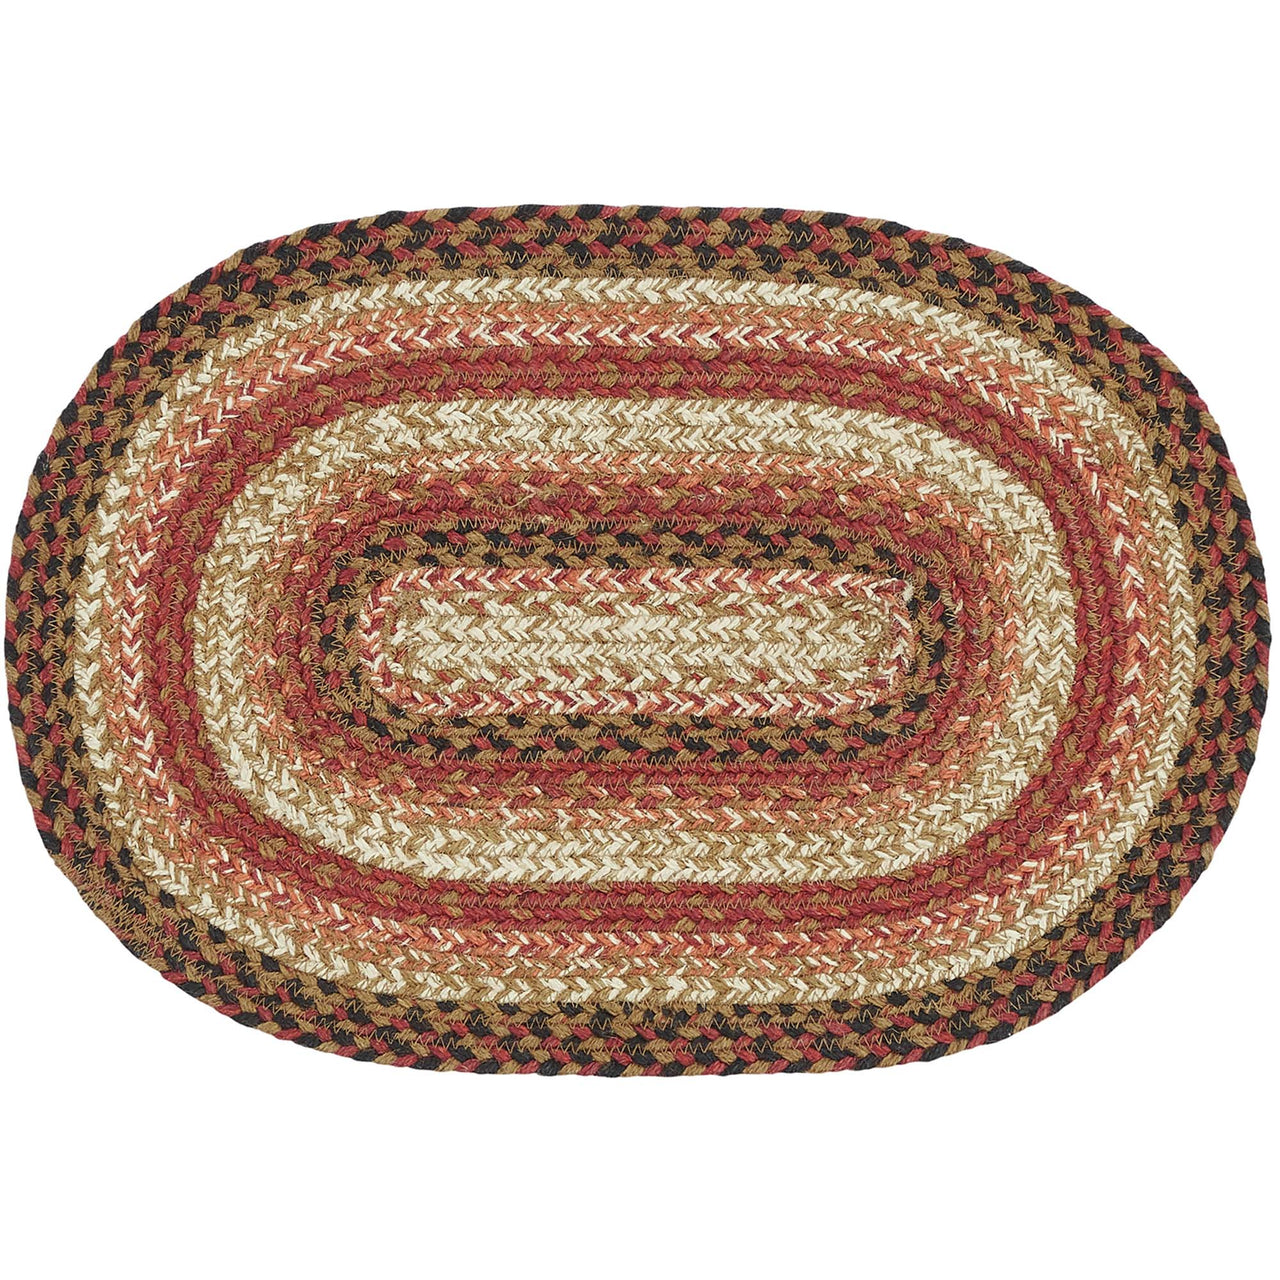 Ginger Spice Jute Braided Oval Placemat 12"x18" VHC Brands